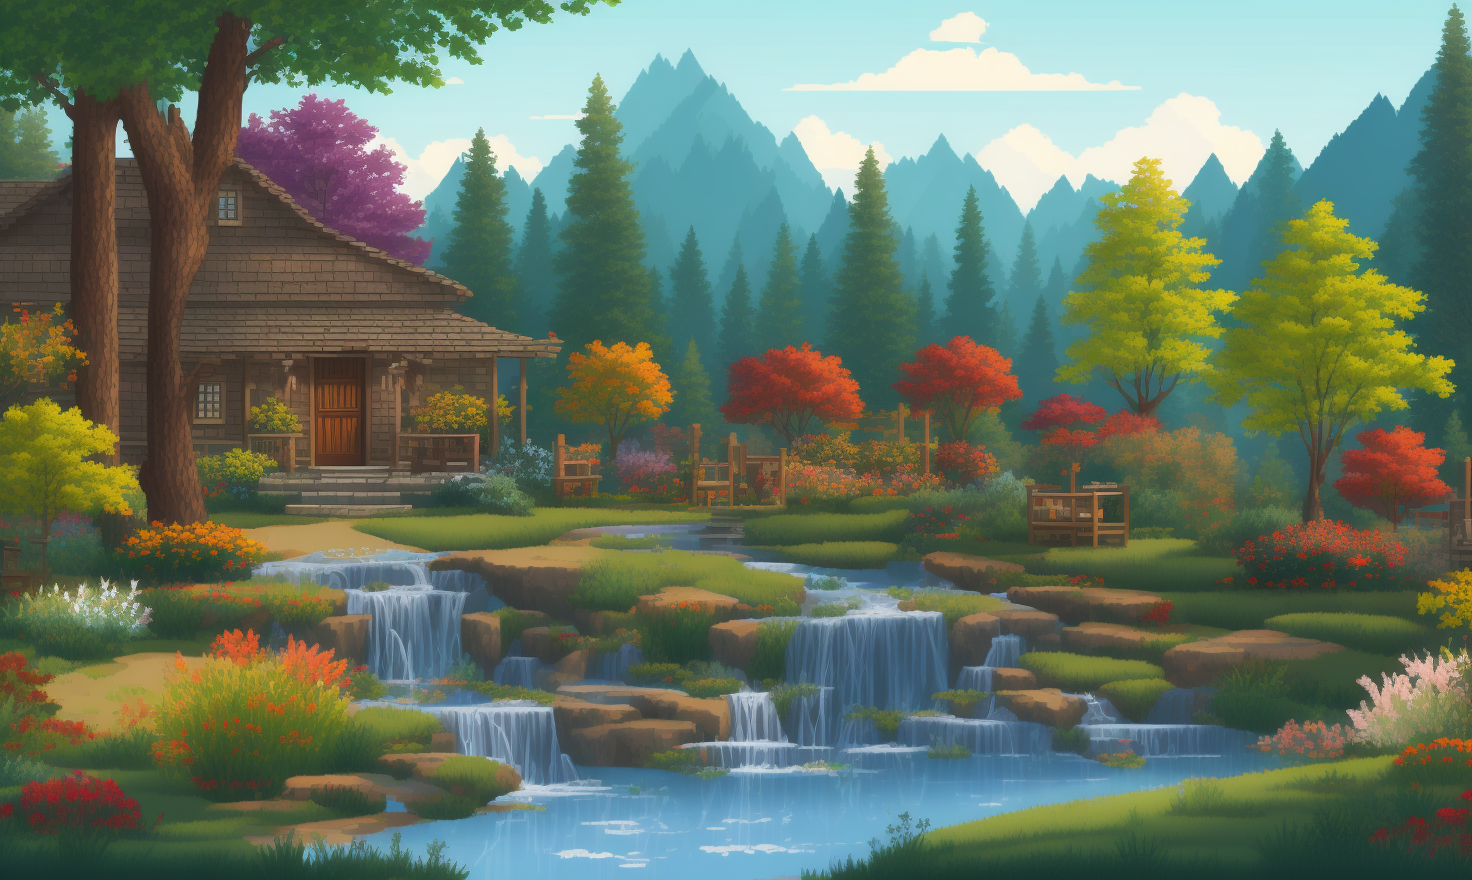 pixelart  Generate an image of a beautiful and serene garden, with colorful flowers, gentle streams, and the sounds of nat...